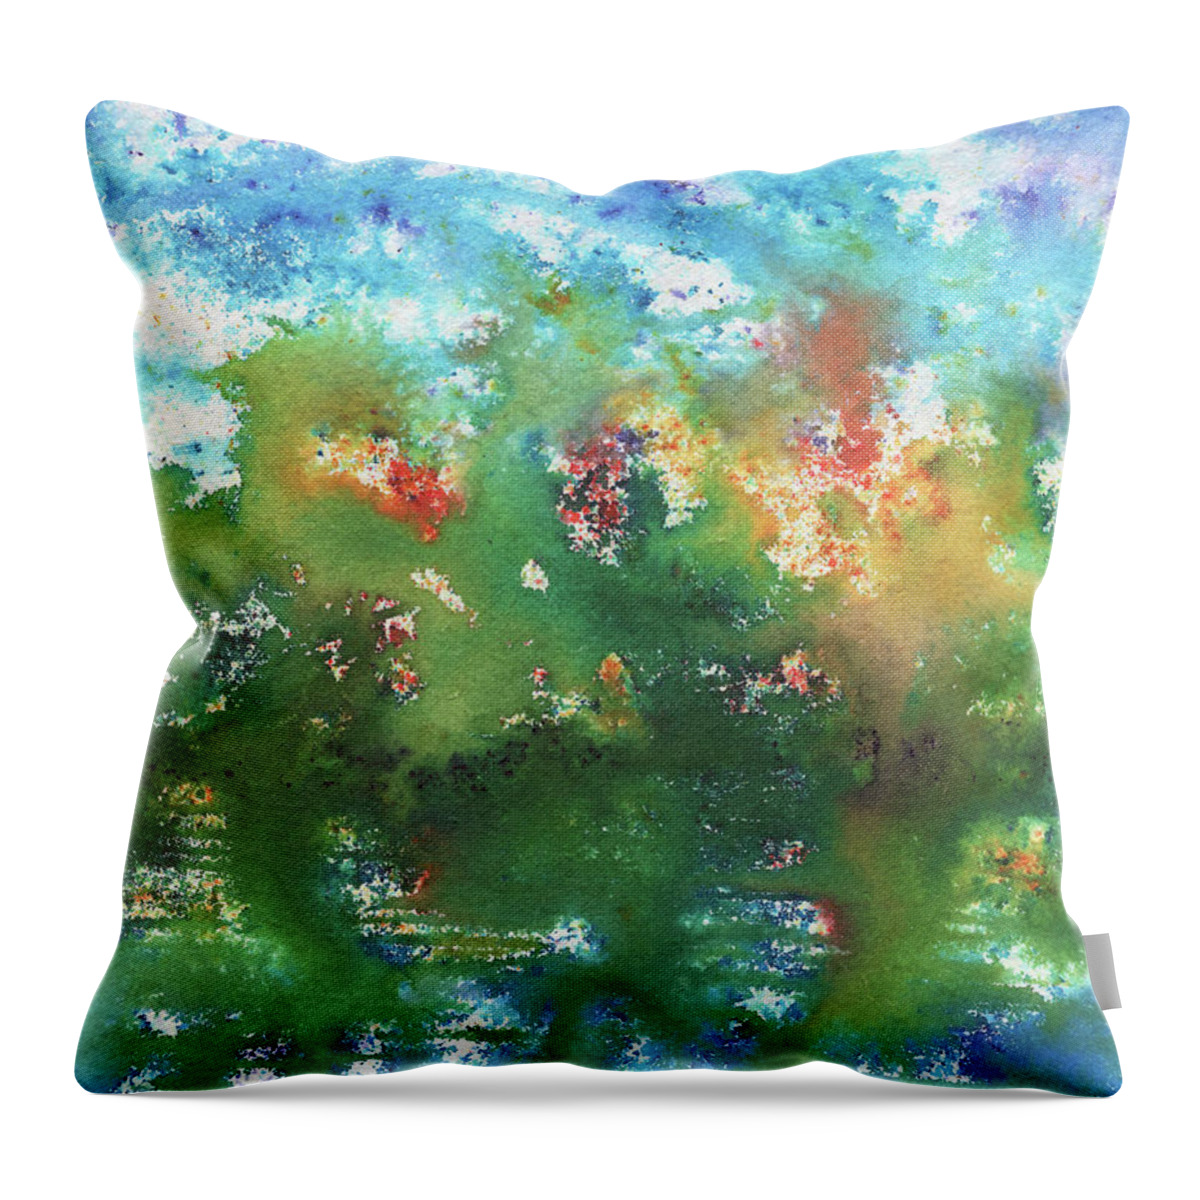 Abstract Watercolor Throw Pillow featuring the painting Abstract Watercolor Splashes Organic Natural Happy Colors Art III by Irina Sztukowski